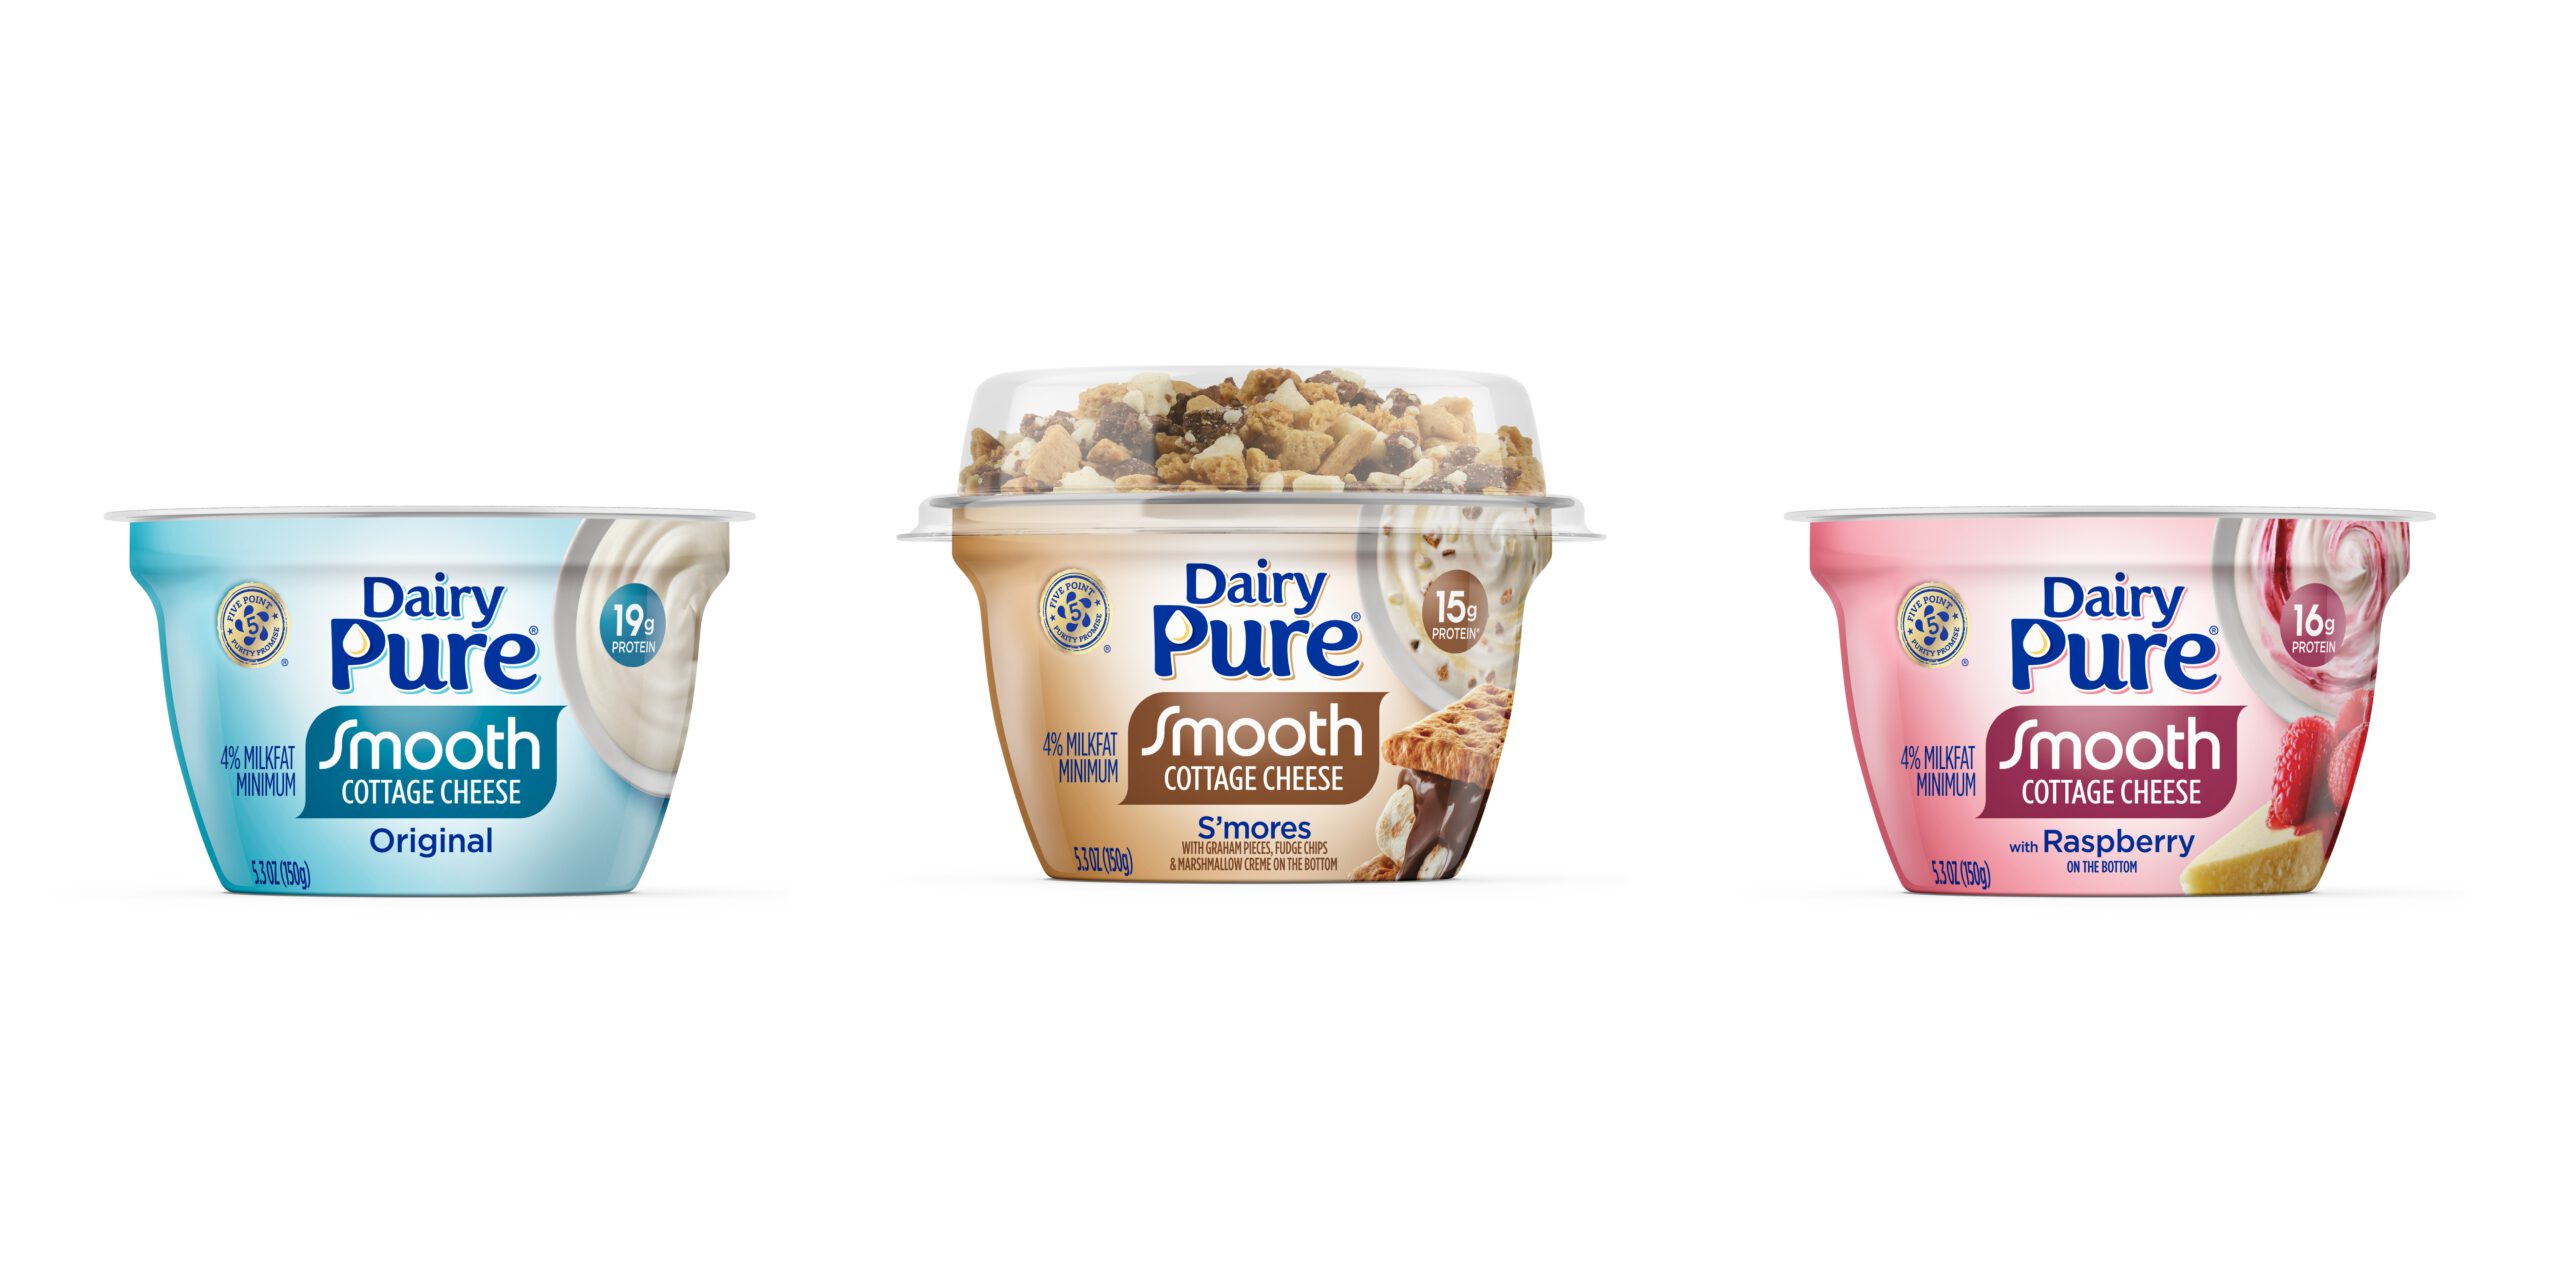 DairyPure debuts a smooth new take on cottage cheese